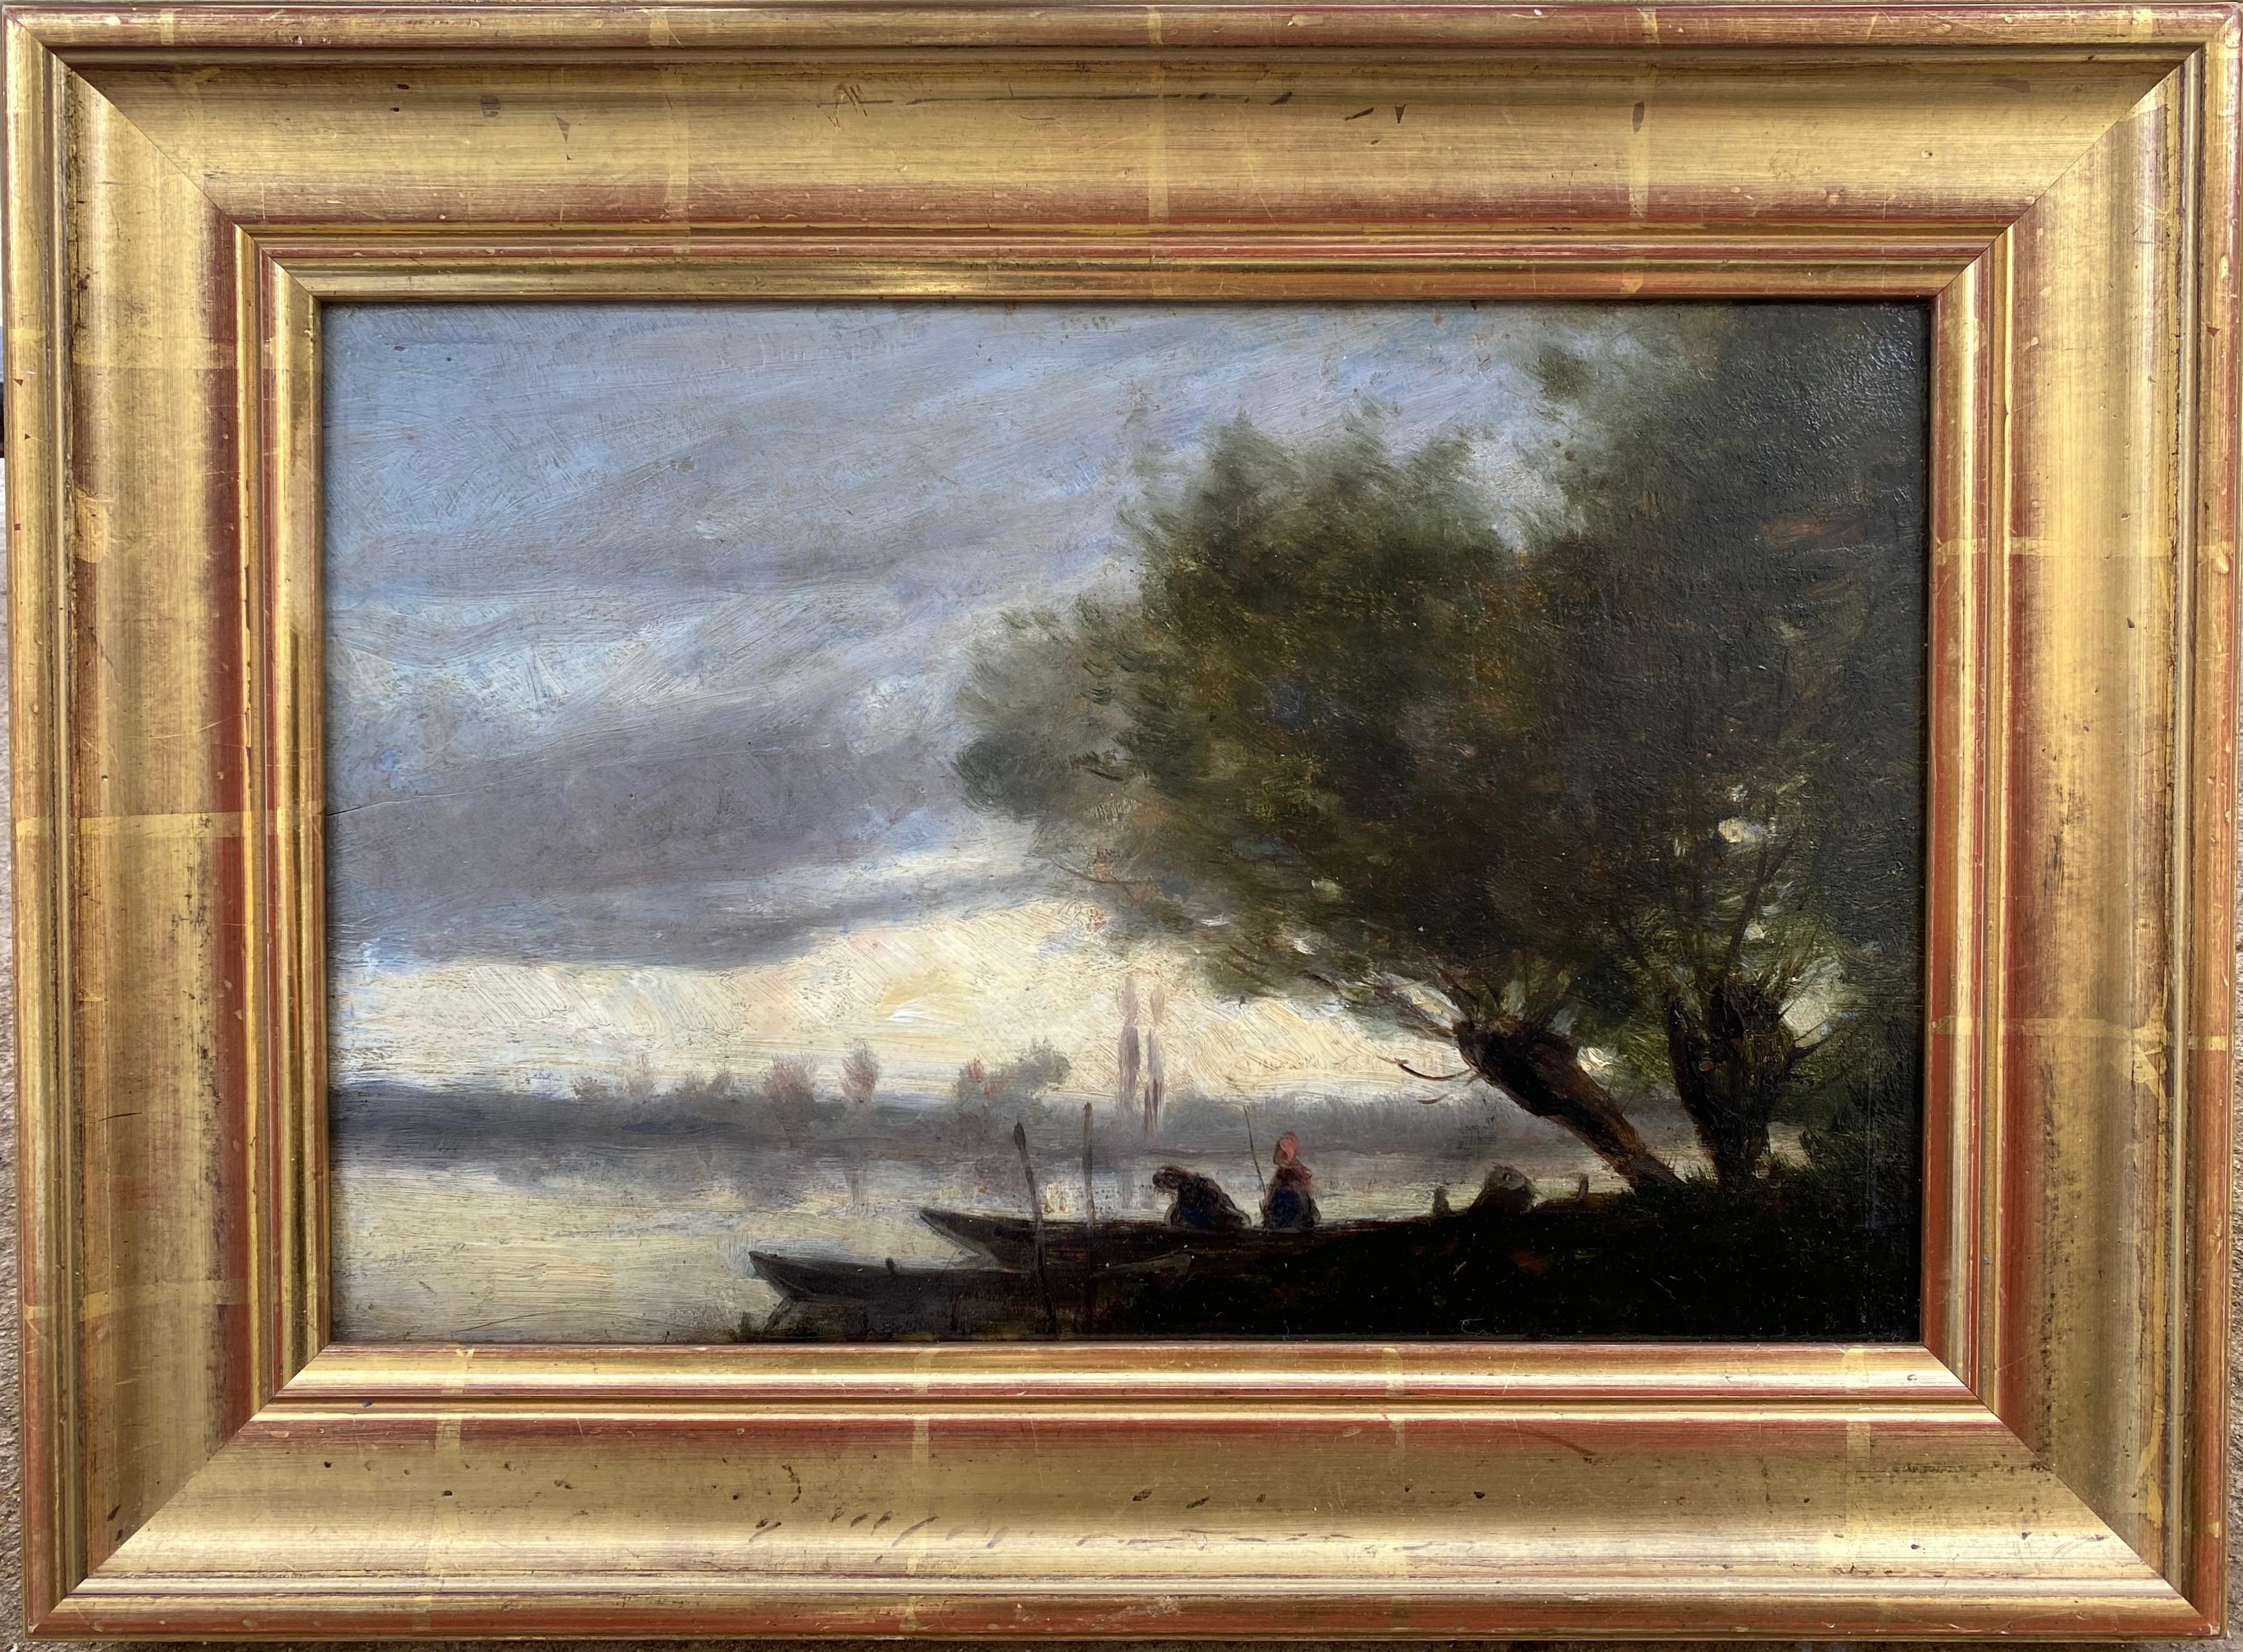 Jean-Baptiste-Camille Corot Figurative Painting - Fishing by Moonlight manner of Corot: Mooonlit lake French Barbizon oil painting